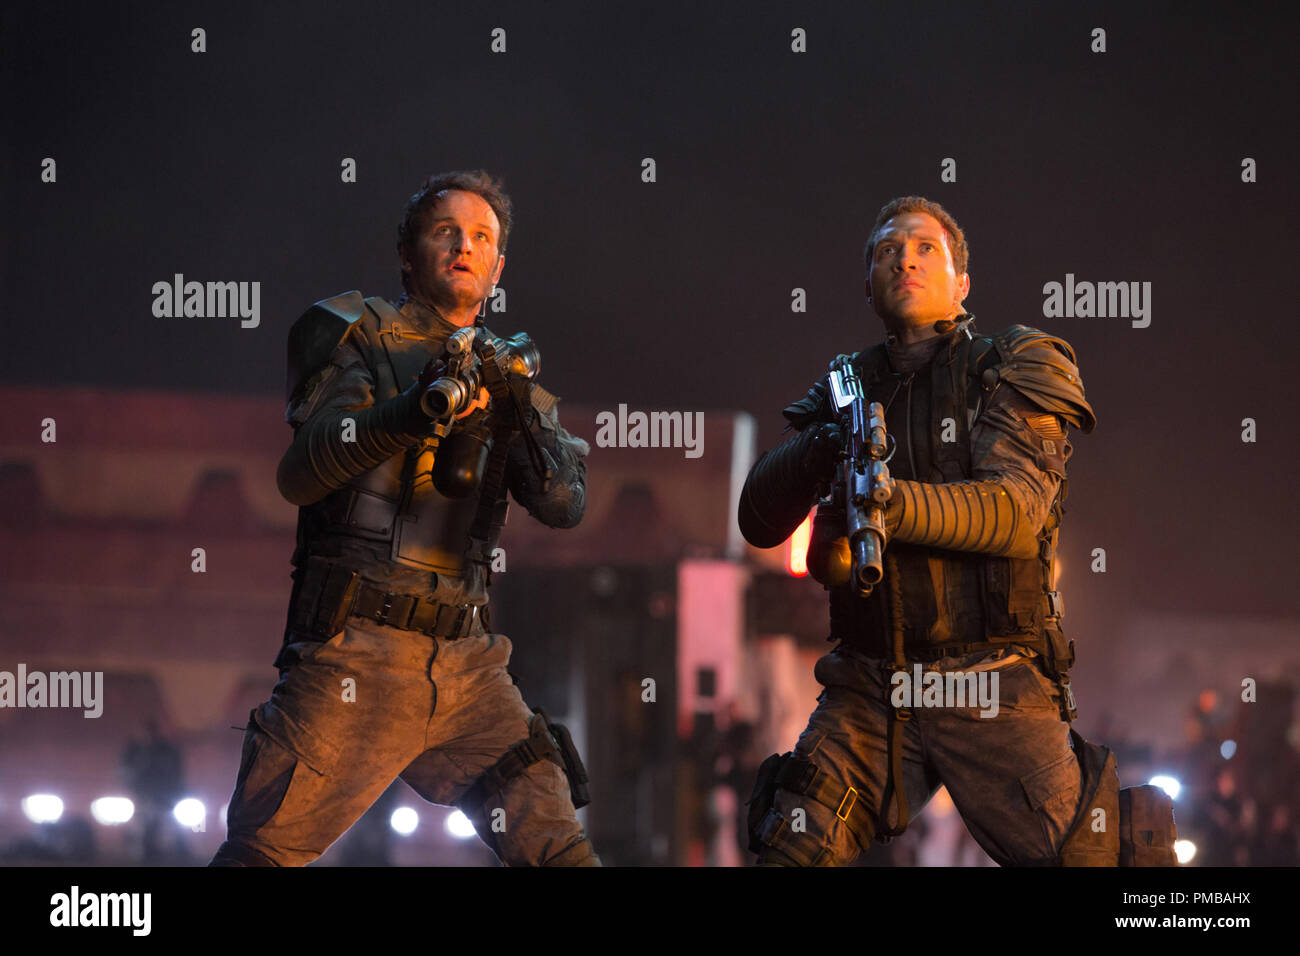 Left to right: Jason Clarke plays John Connor and Jai Courtney plays Kyle Reese in TERMINATOR GENISYS from Paramount Pictures and Skydance Productions. Stock Photo